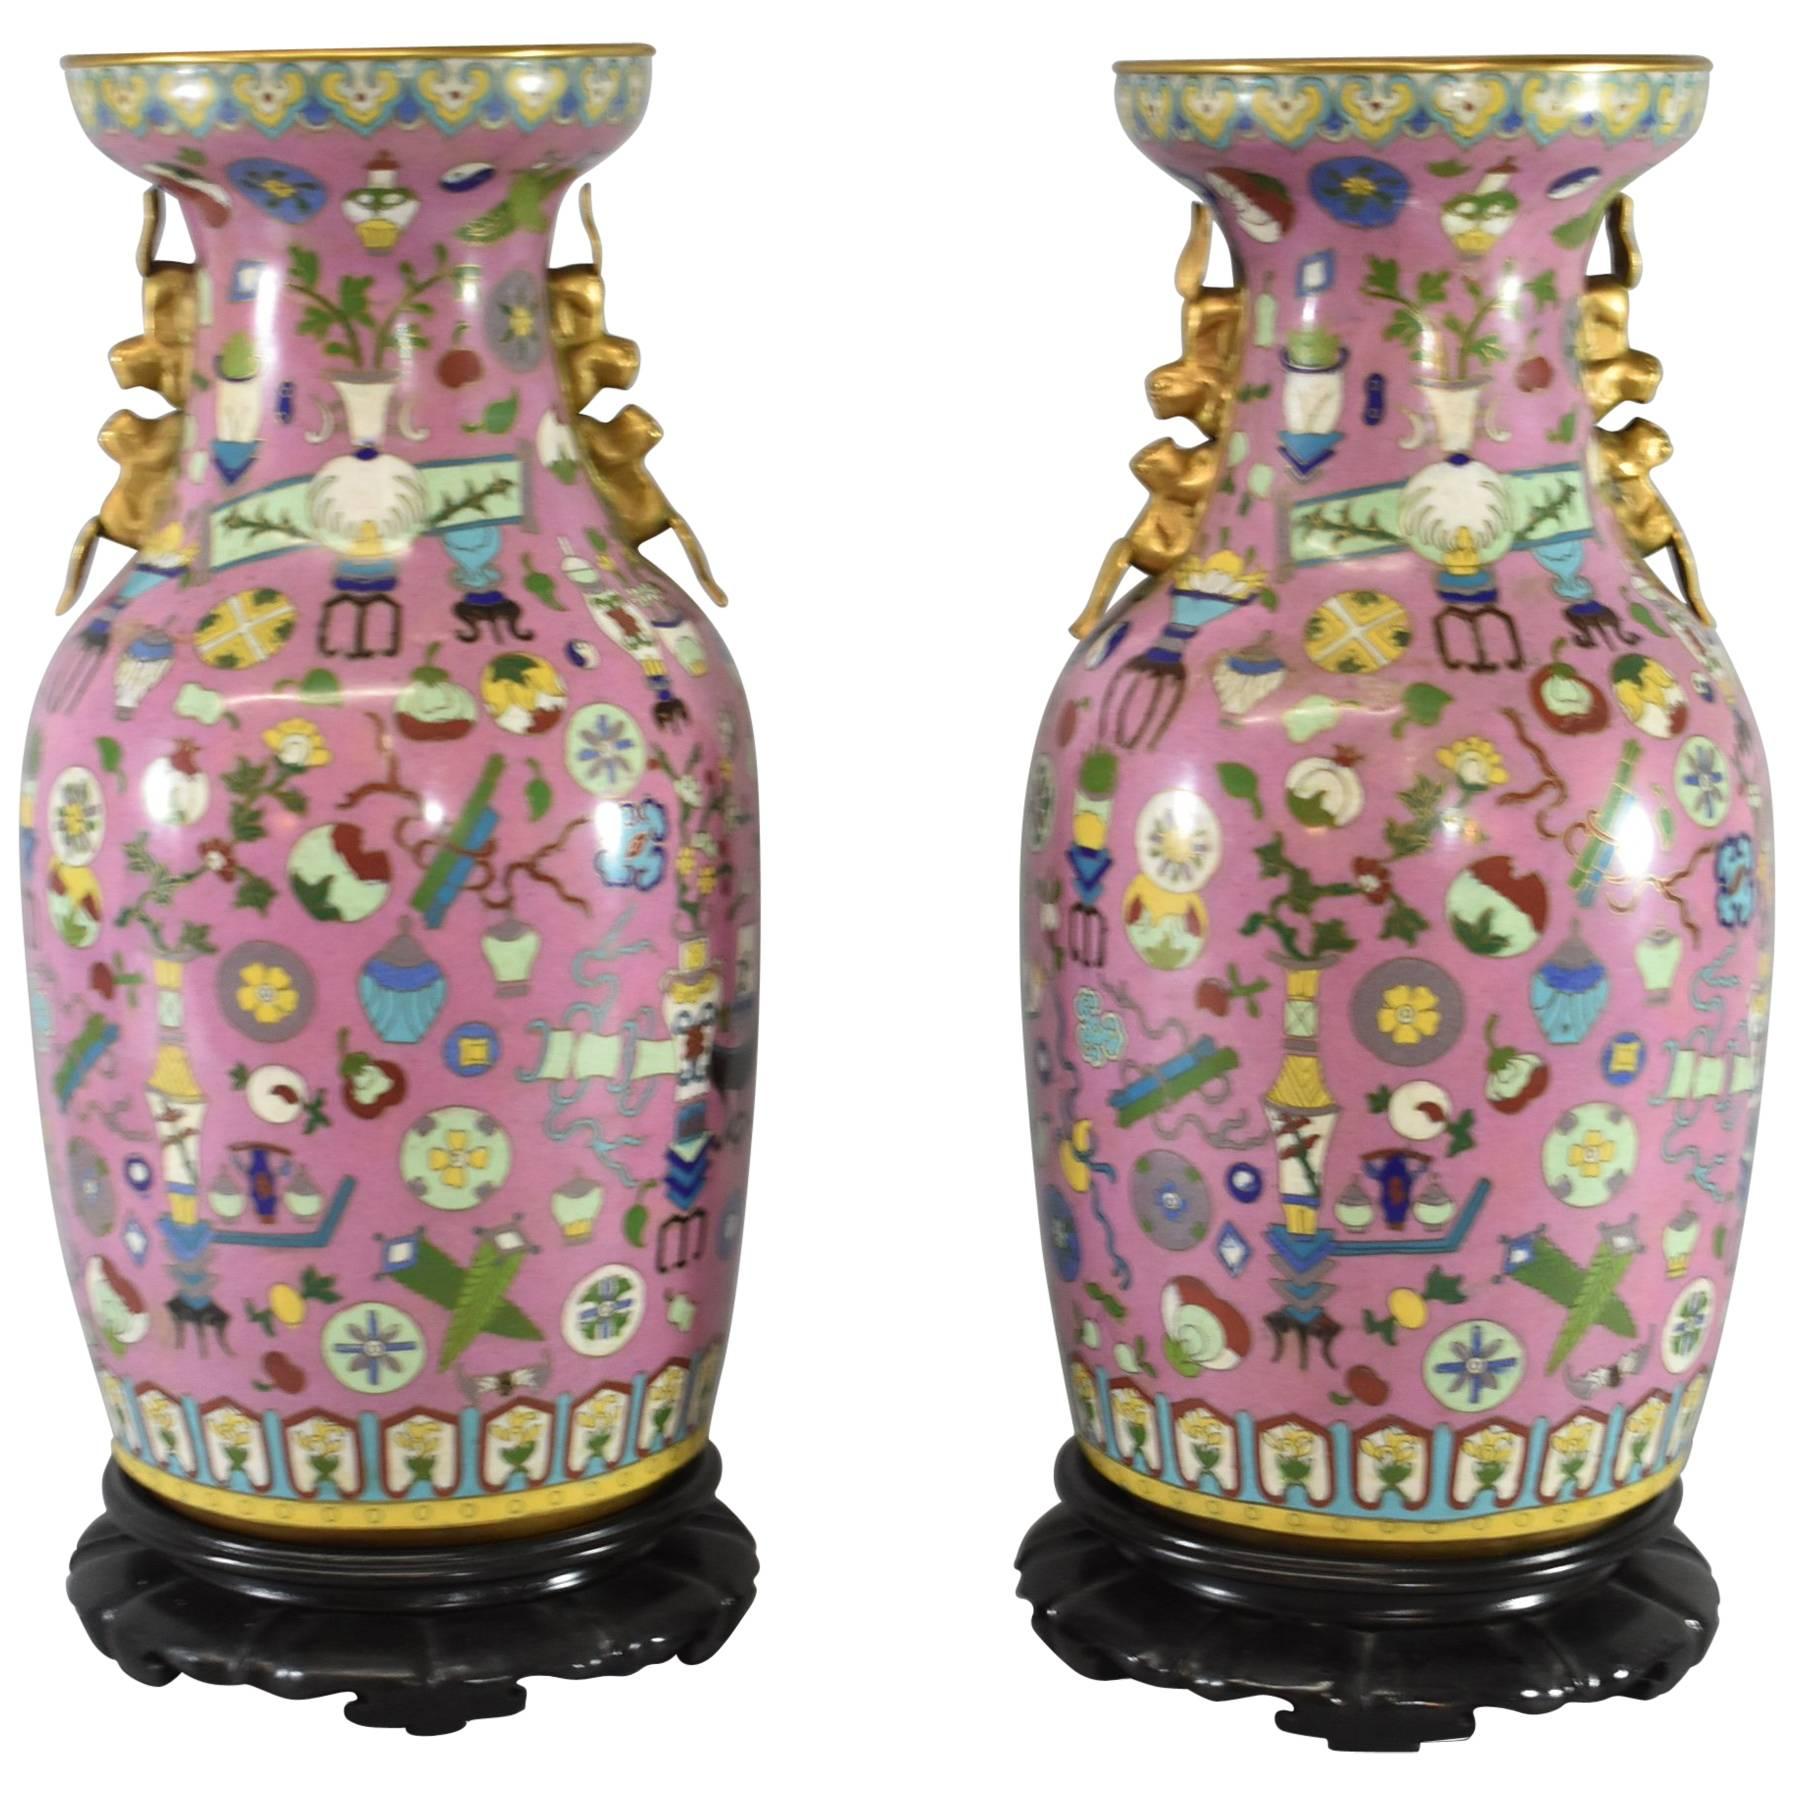 Pair of Cloisonné Vases in the Hundred Treasures Pattern with Brass Handles